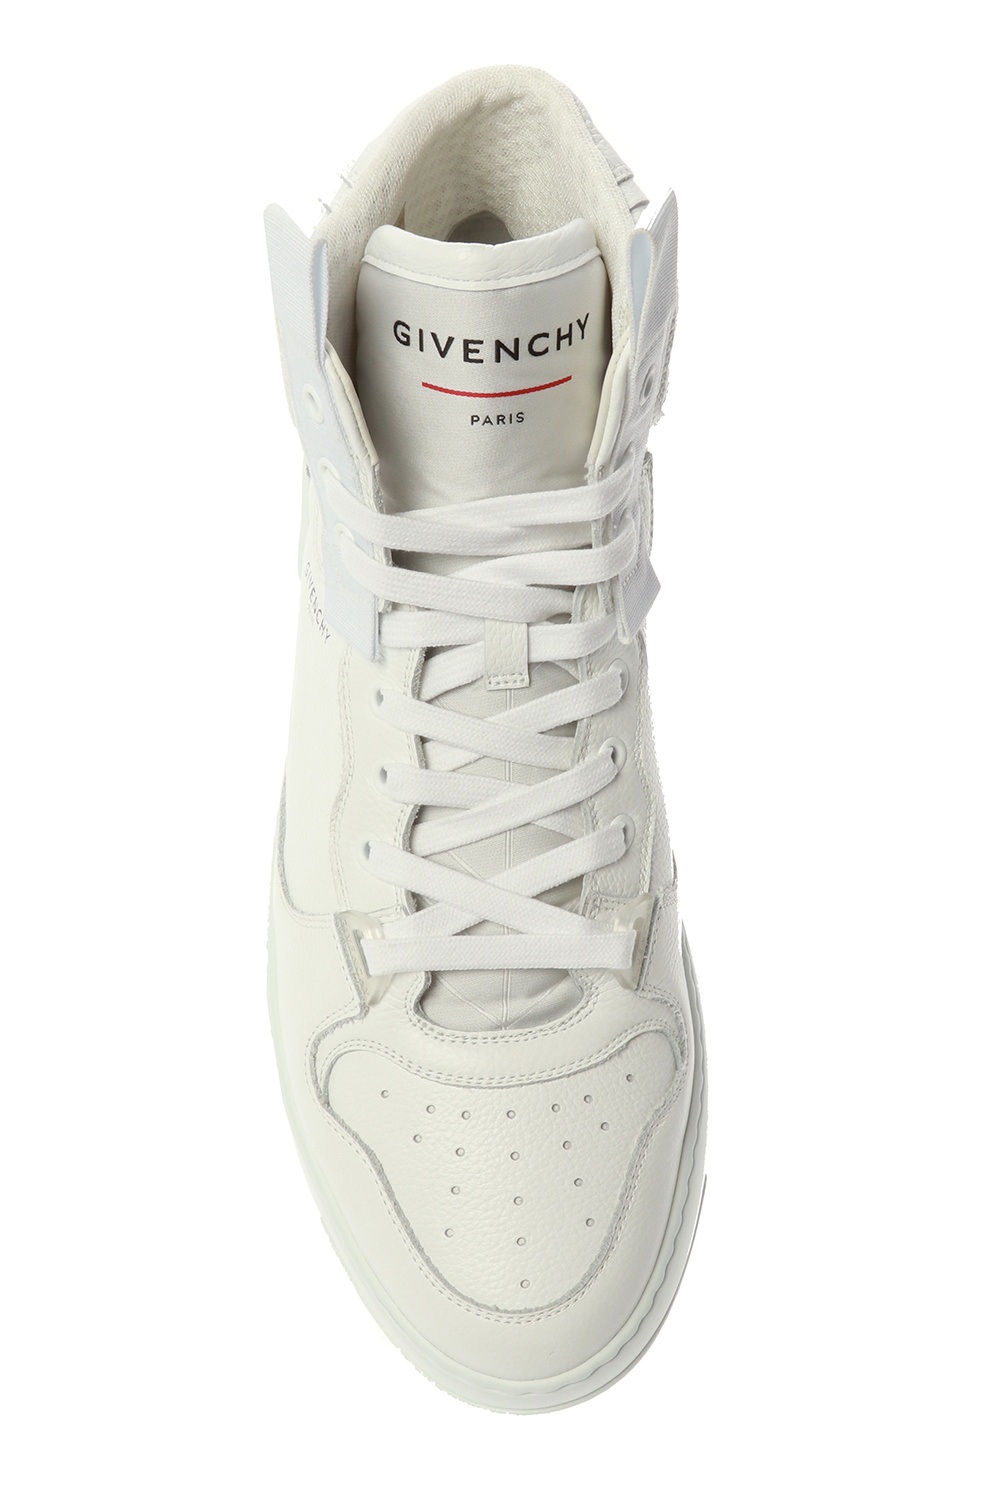 givenchy chainlink-print ‘Basket Wing’ high-top sneakers